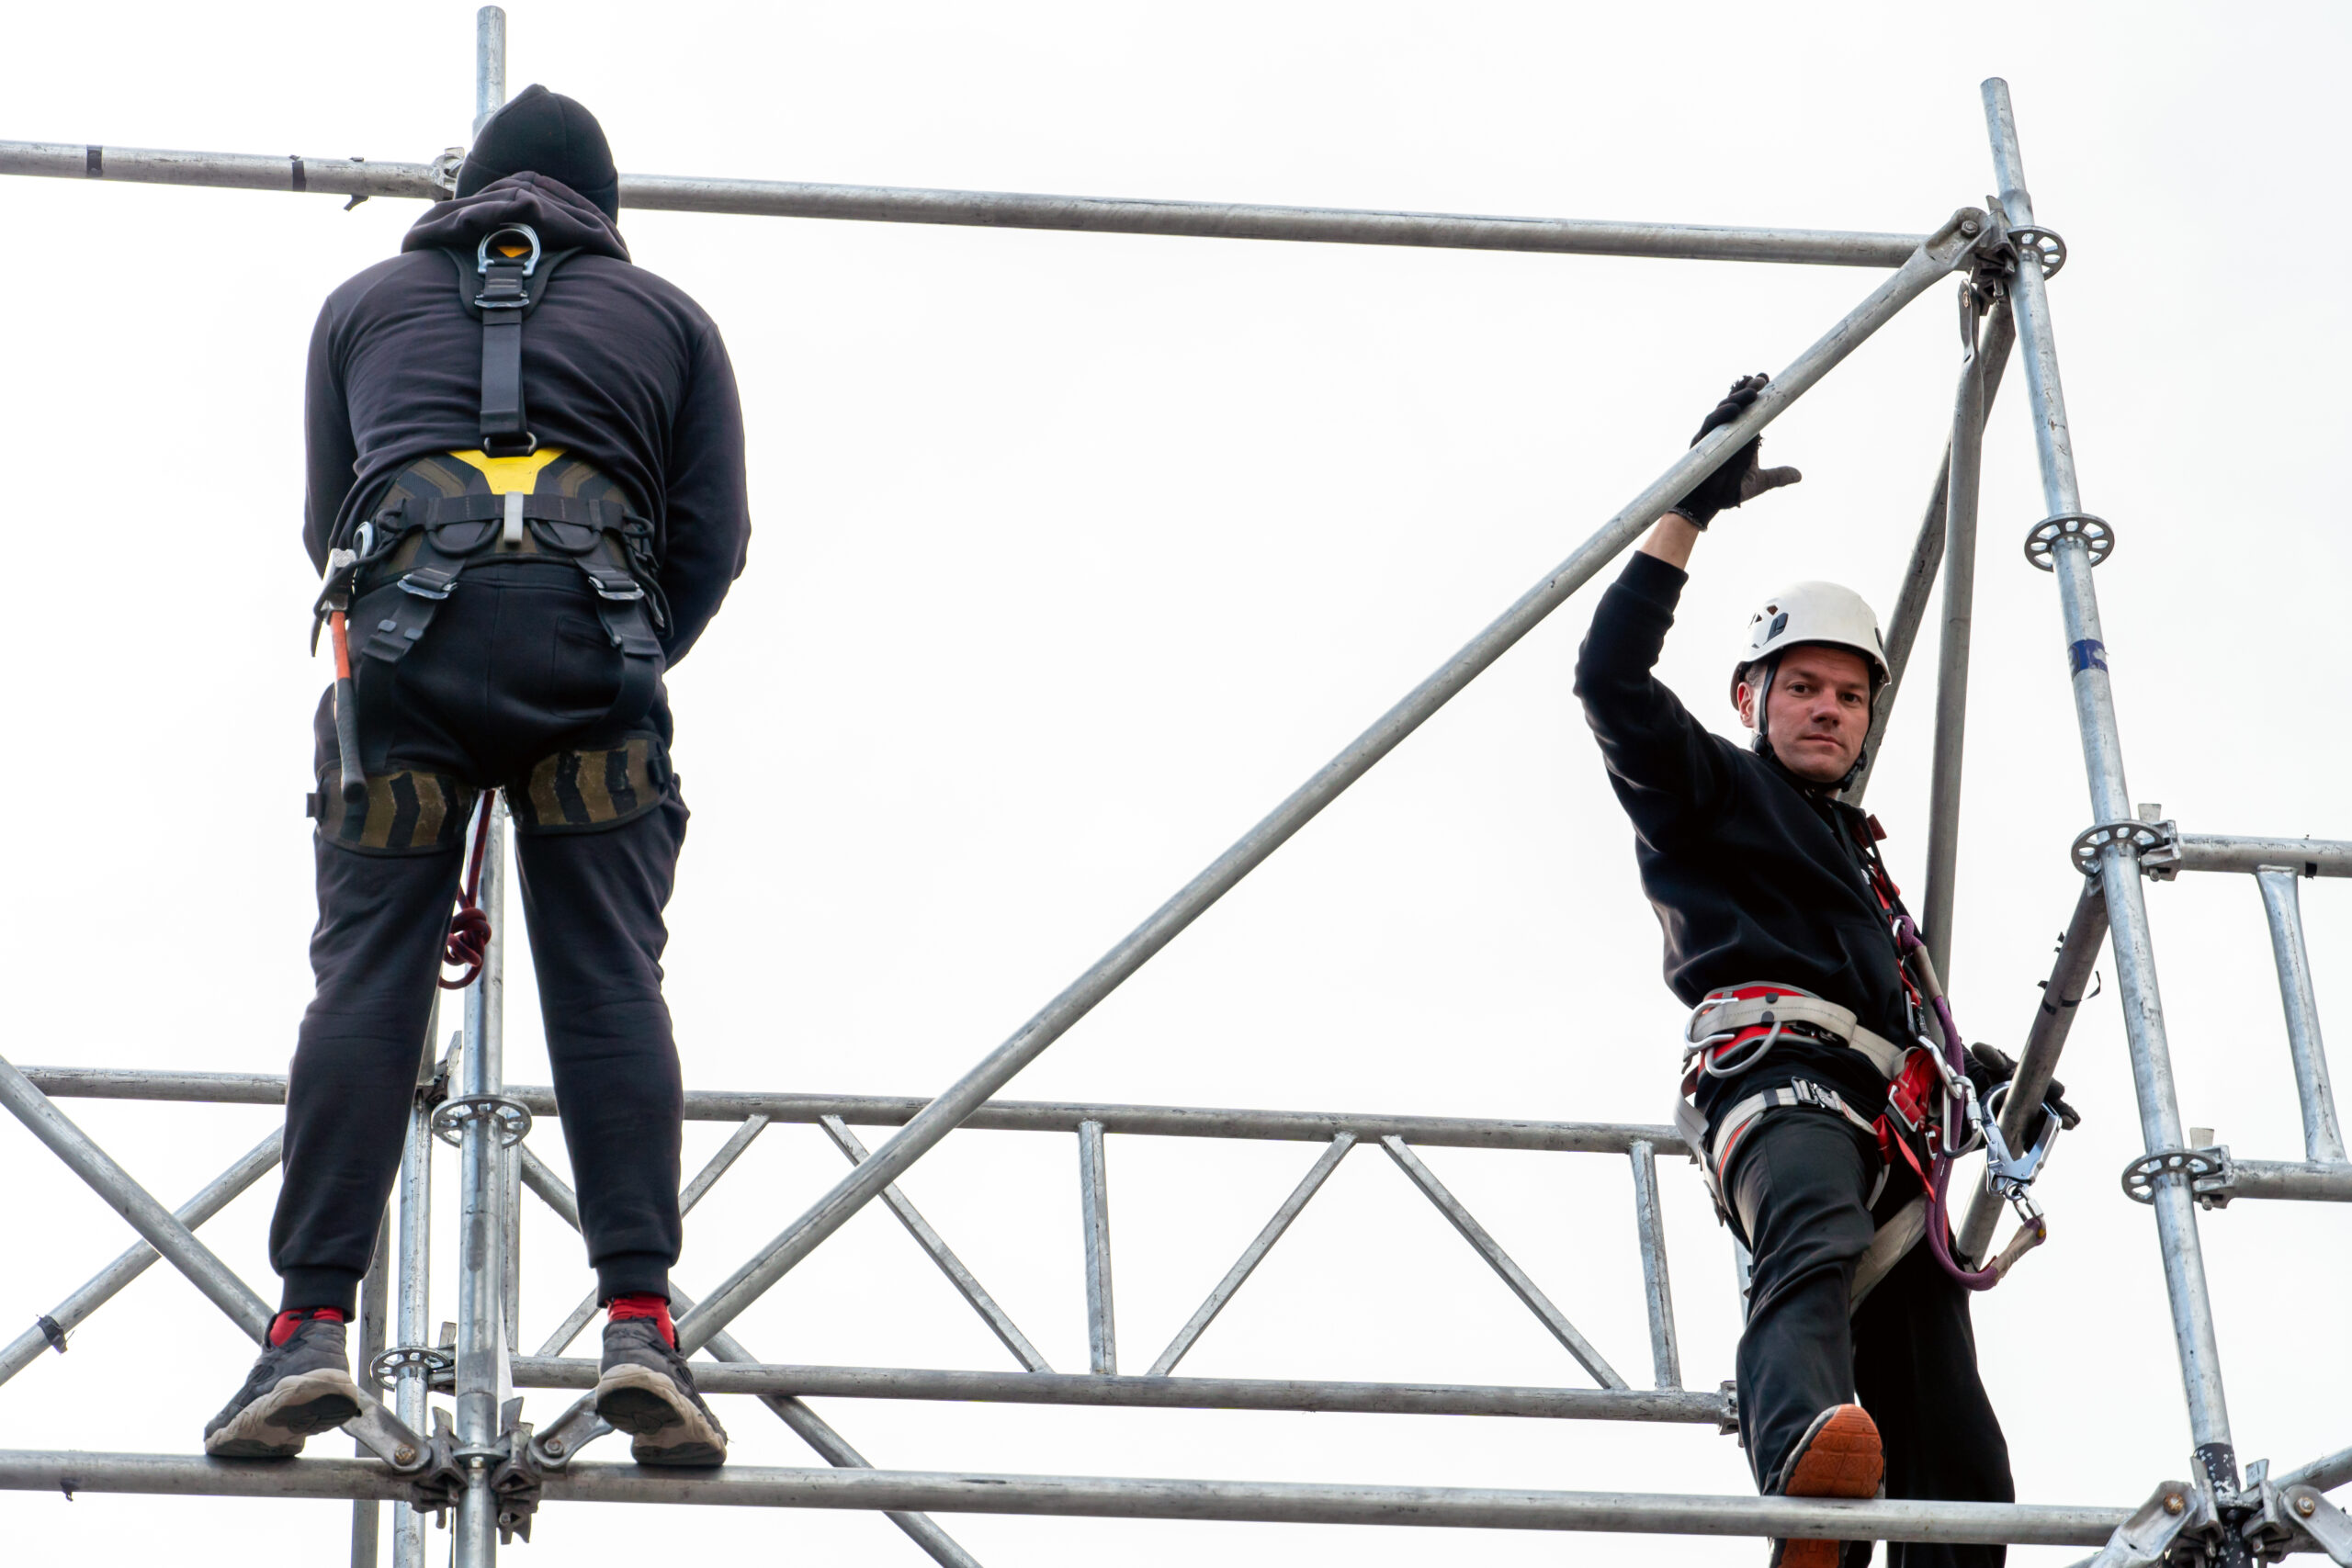 An industrial climber wearing a helmet and a protective belt is tied with a rope to a support at a high altitude. A specialist assembles a stage structure from a modular system of metal scaffolding.